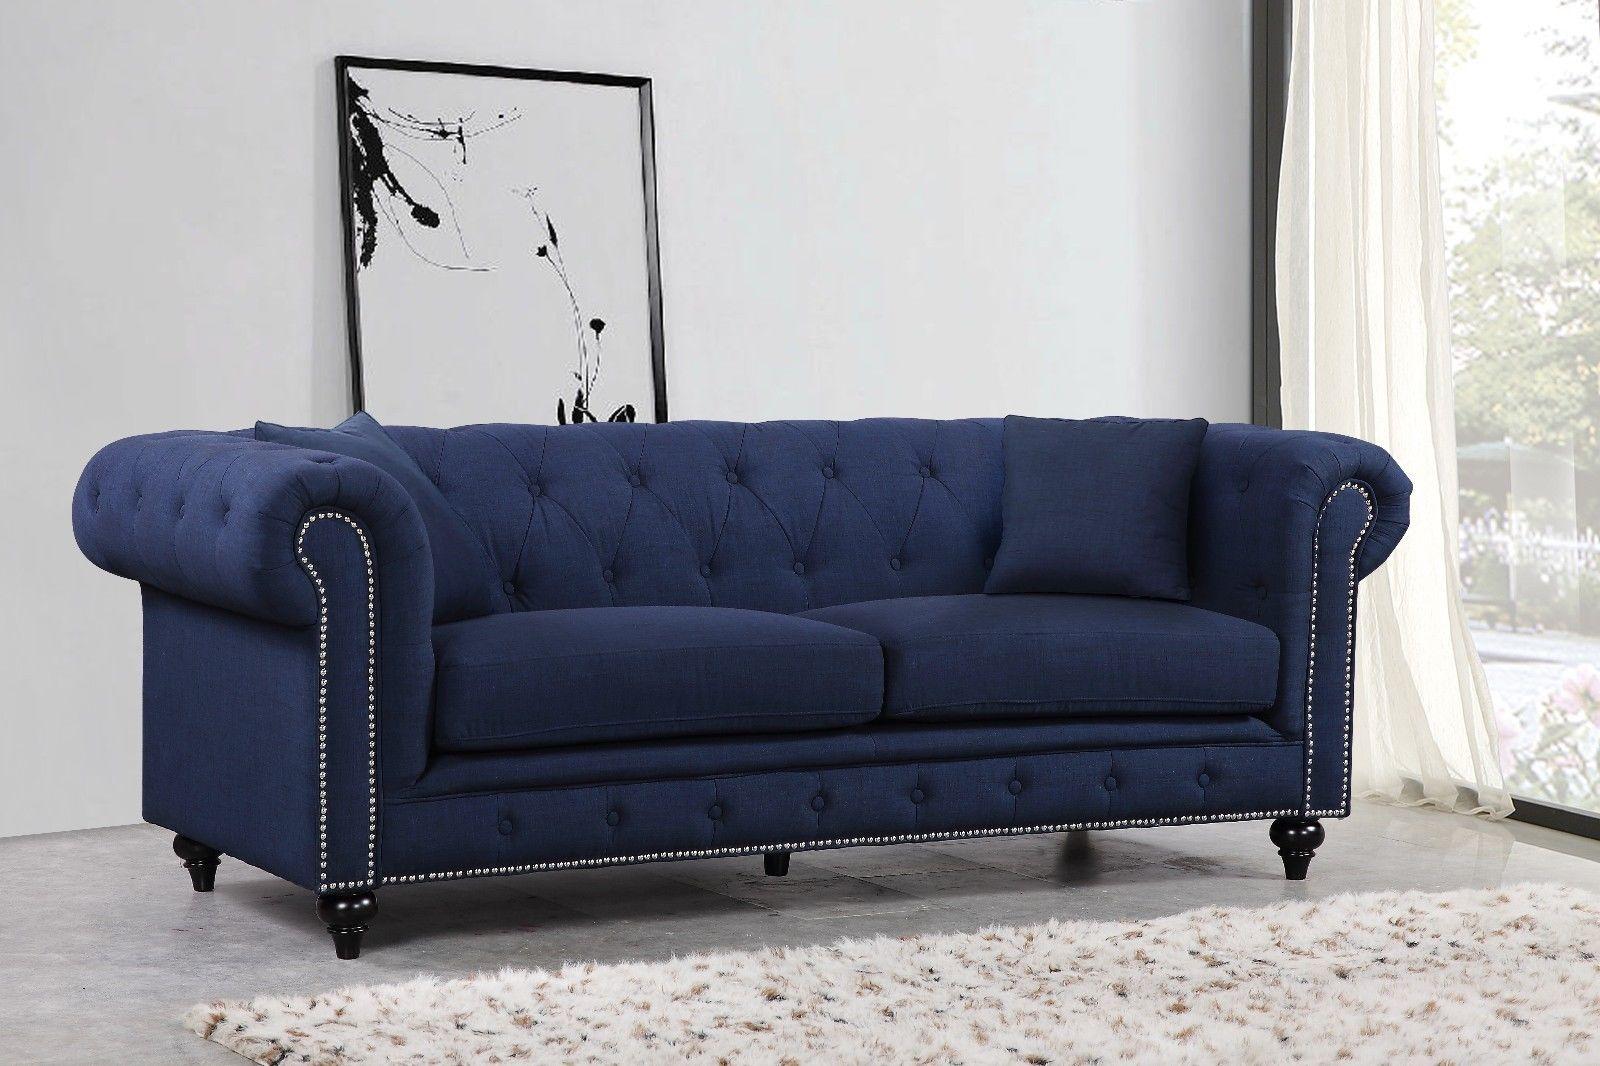 

    
Sofa Set 3Pcs in Navy Linen Contemporary Meridian Furniture 662 Chesterfield
